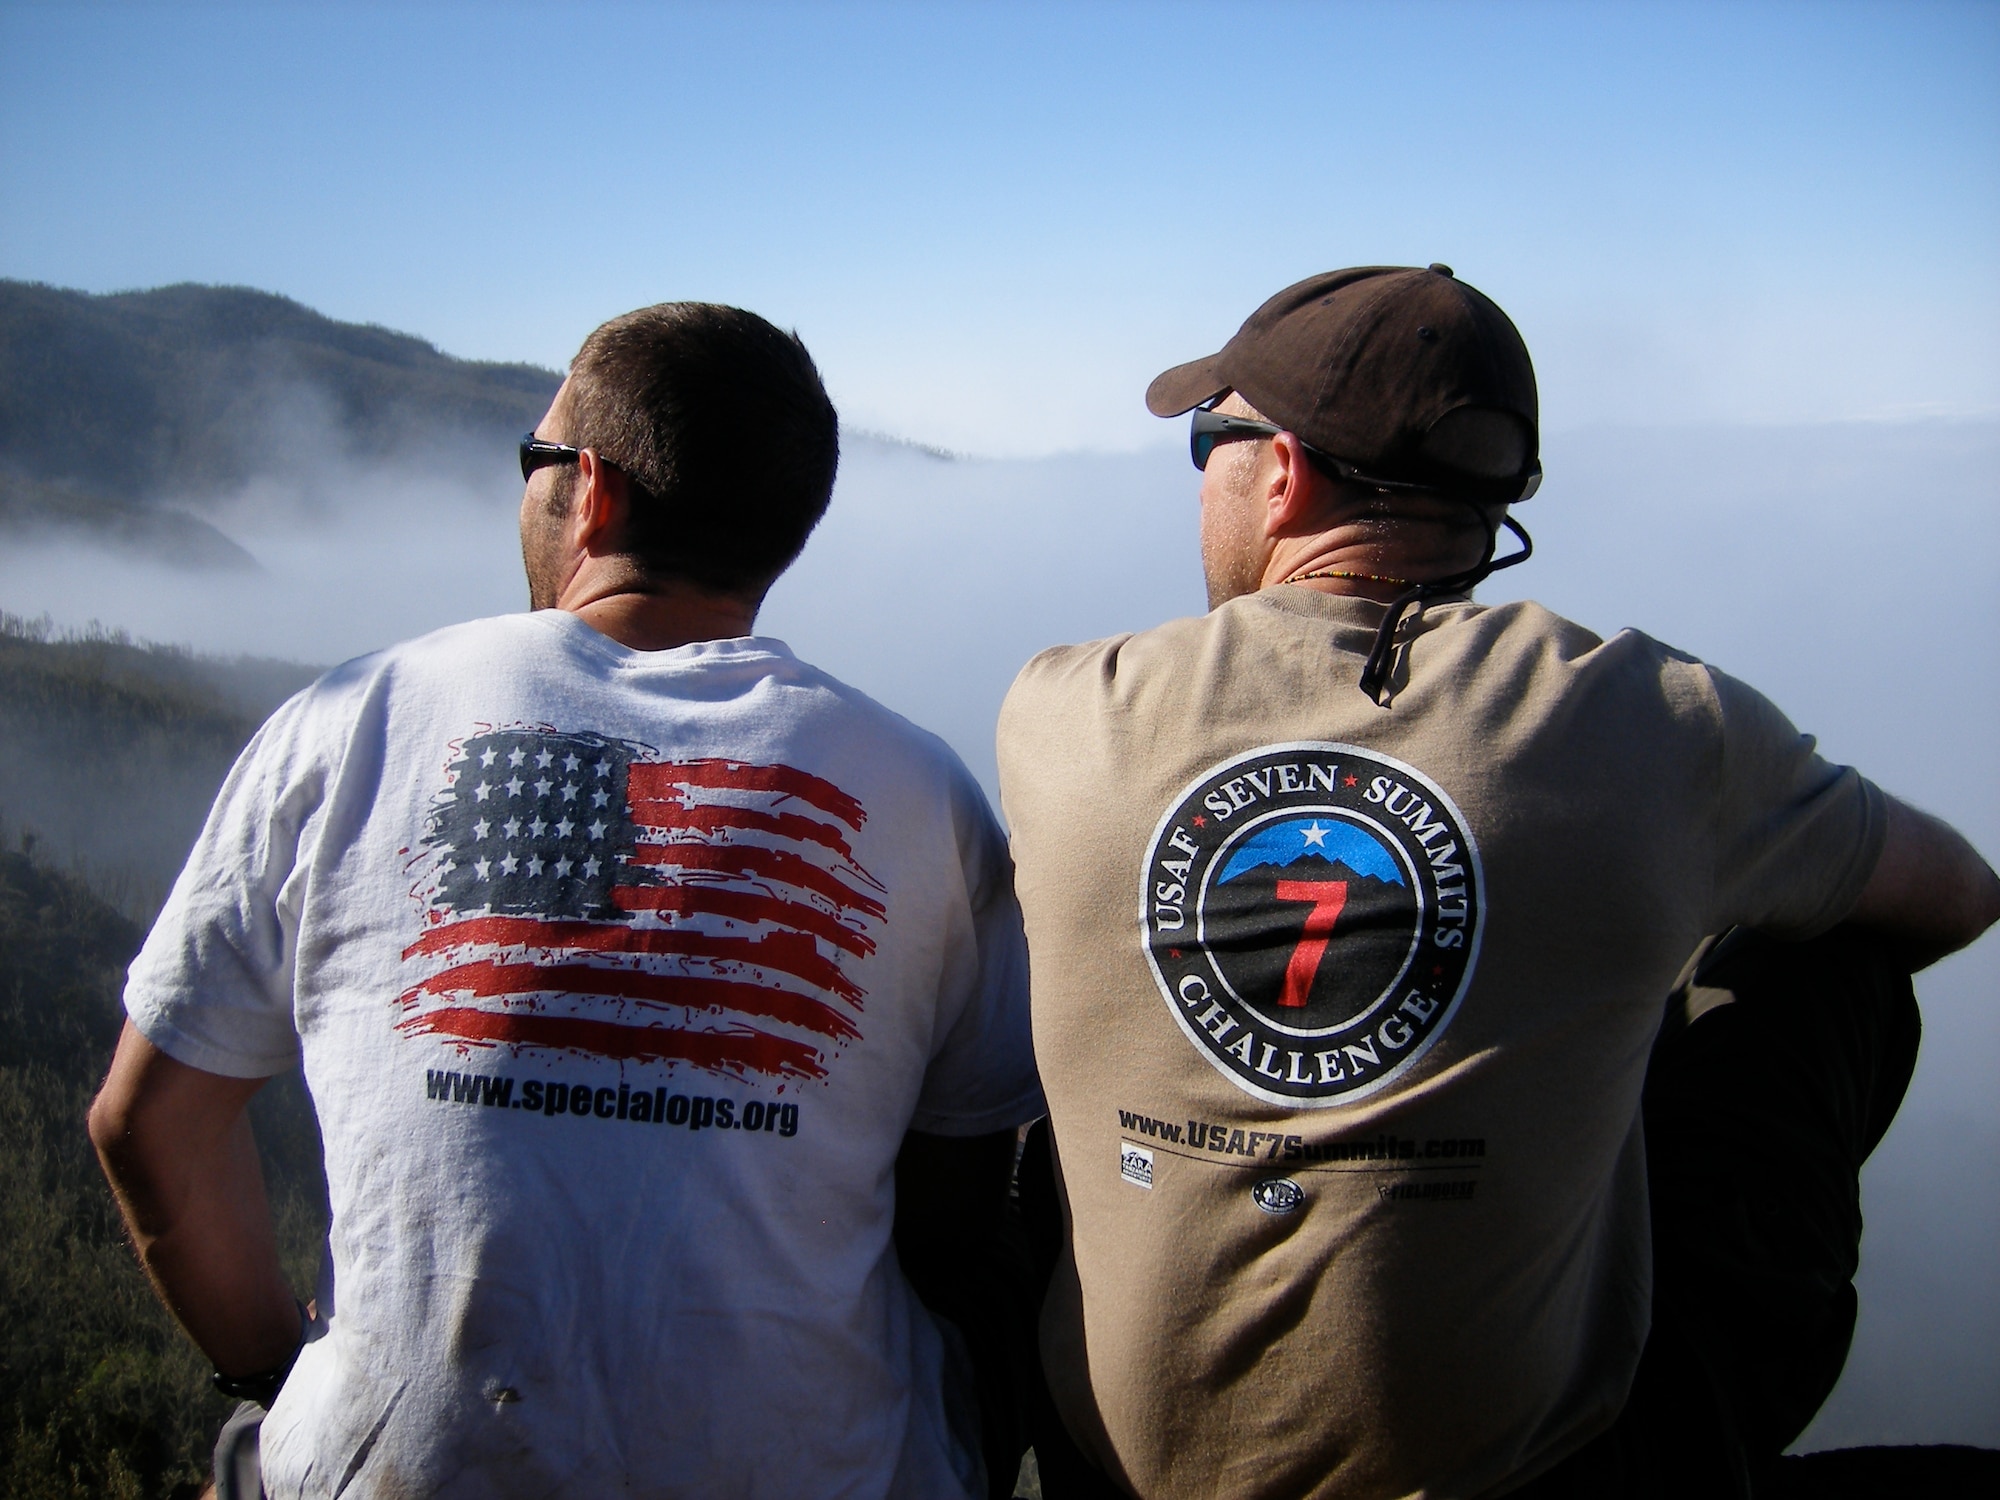 Capt. Rob Marshall (right), 8th Special Operations Squadron, and then 1st Lt. Mark Uberuaga, 55th Rescue Squadron, enjoy the view of the Mount Kilimanjaro summit in Tanzania, Africa in July 2006. The Airmen founded the U.S. Air Force Seven Summits Challenge, which aims to lead a team of Air Force members to the top of the highest mountain on each continent, and serves as a fundraiser for the Special Operations Warrior Foundation. Ten Airmen reached the summit of 19,340-foot Mount Kilimanjaro, the team’s second climb. (U.S. Air Force photo)